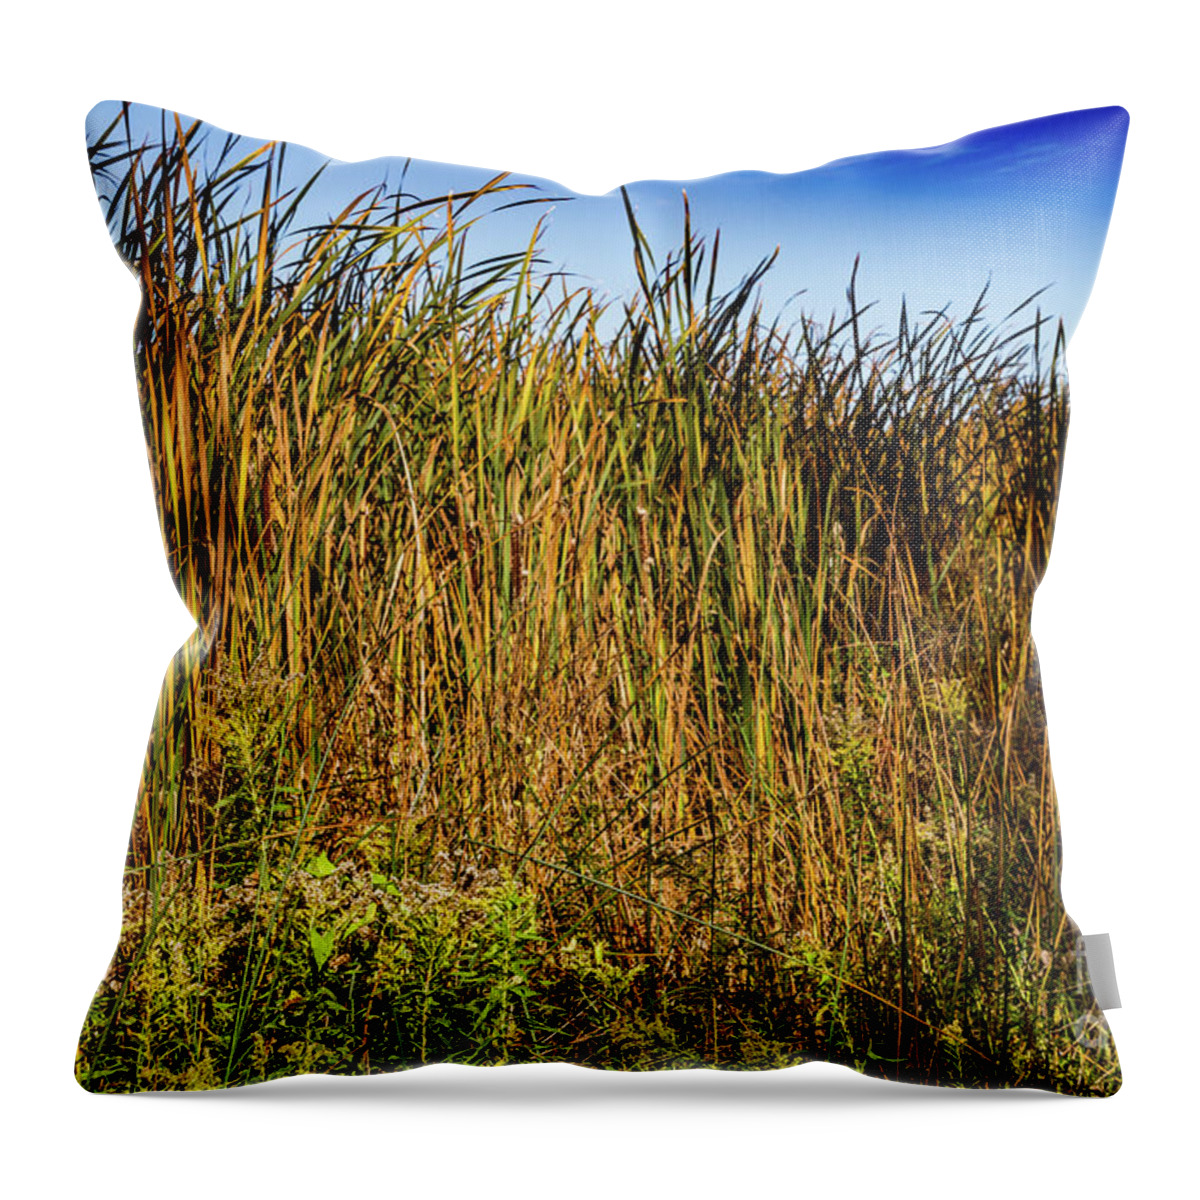 Grass Throw Pillow featuring the photograph Swamp Grass by William Norton